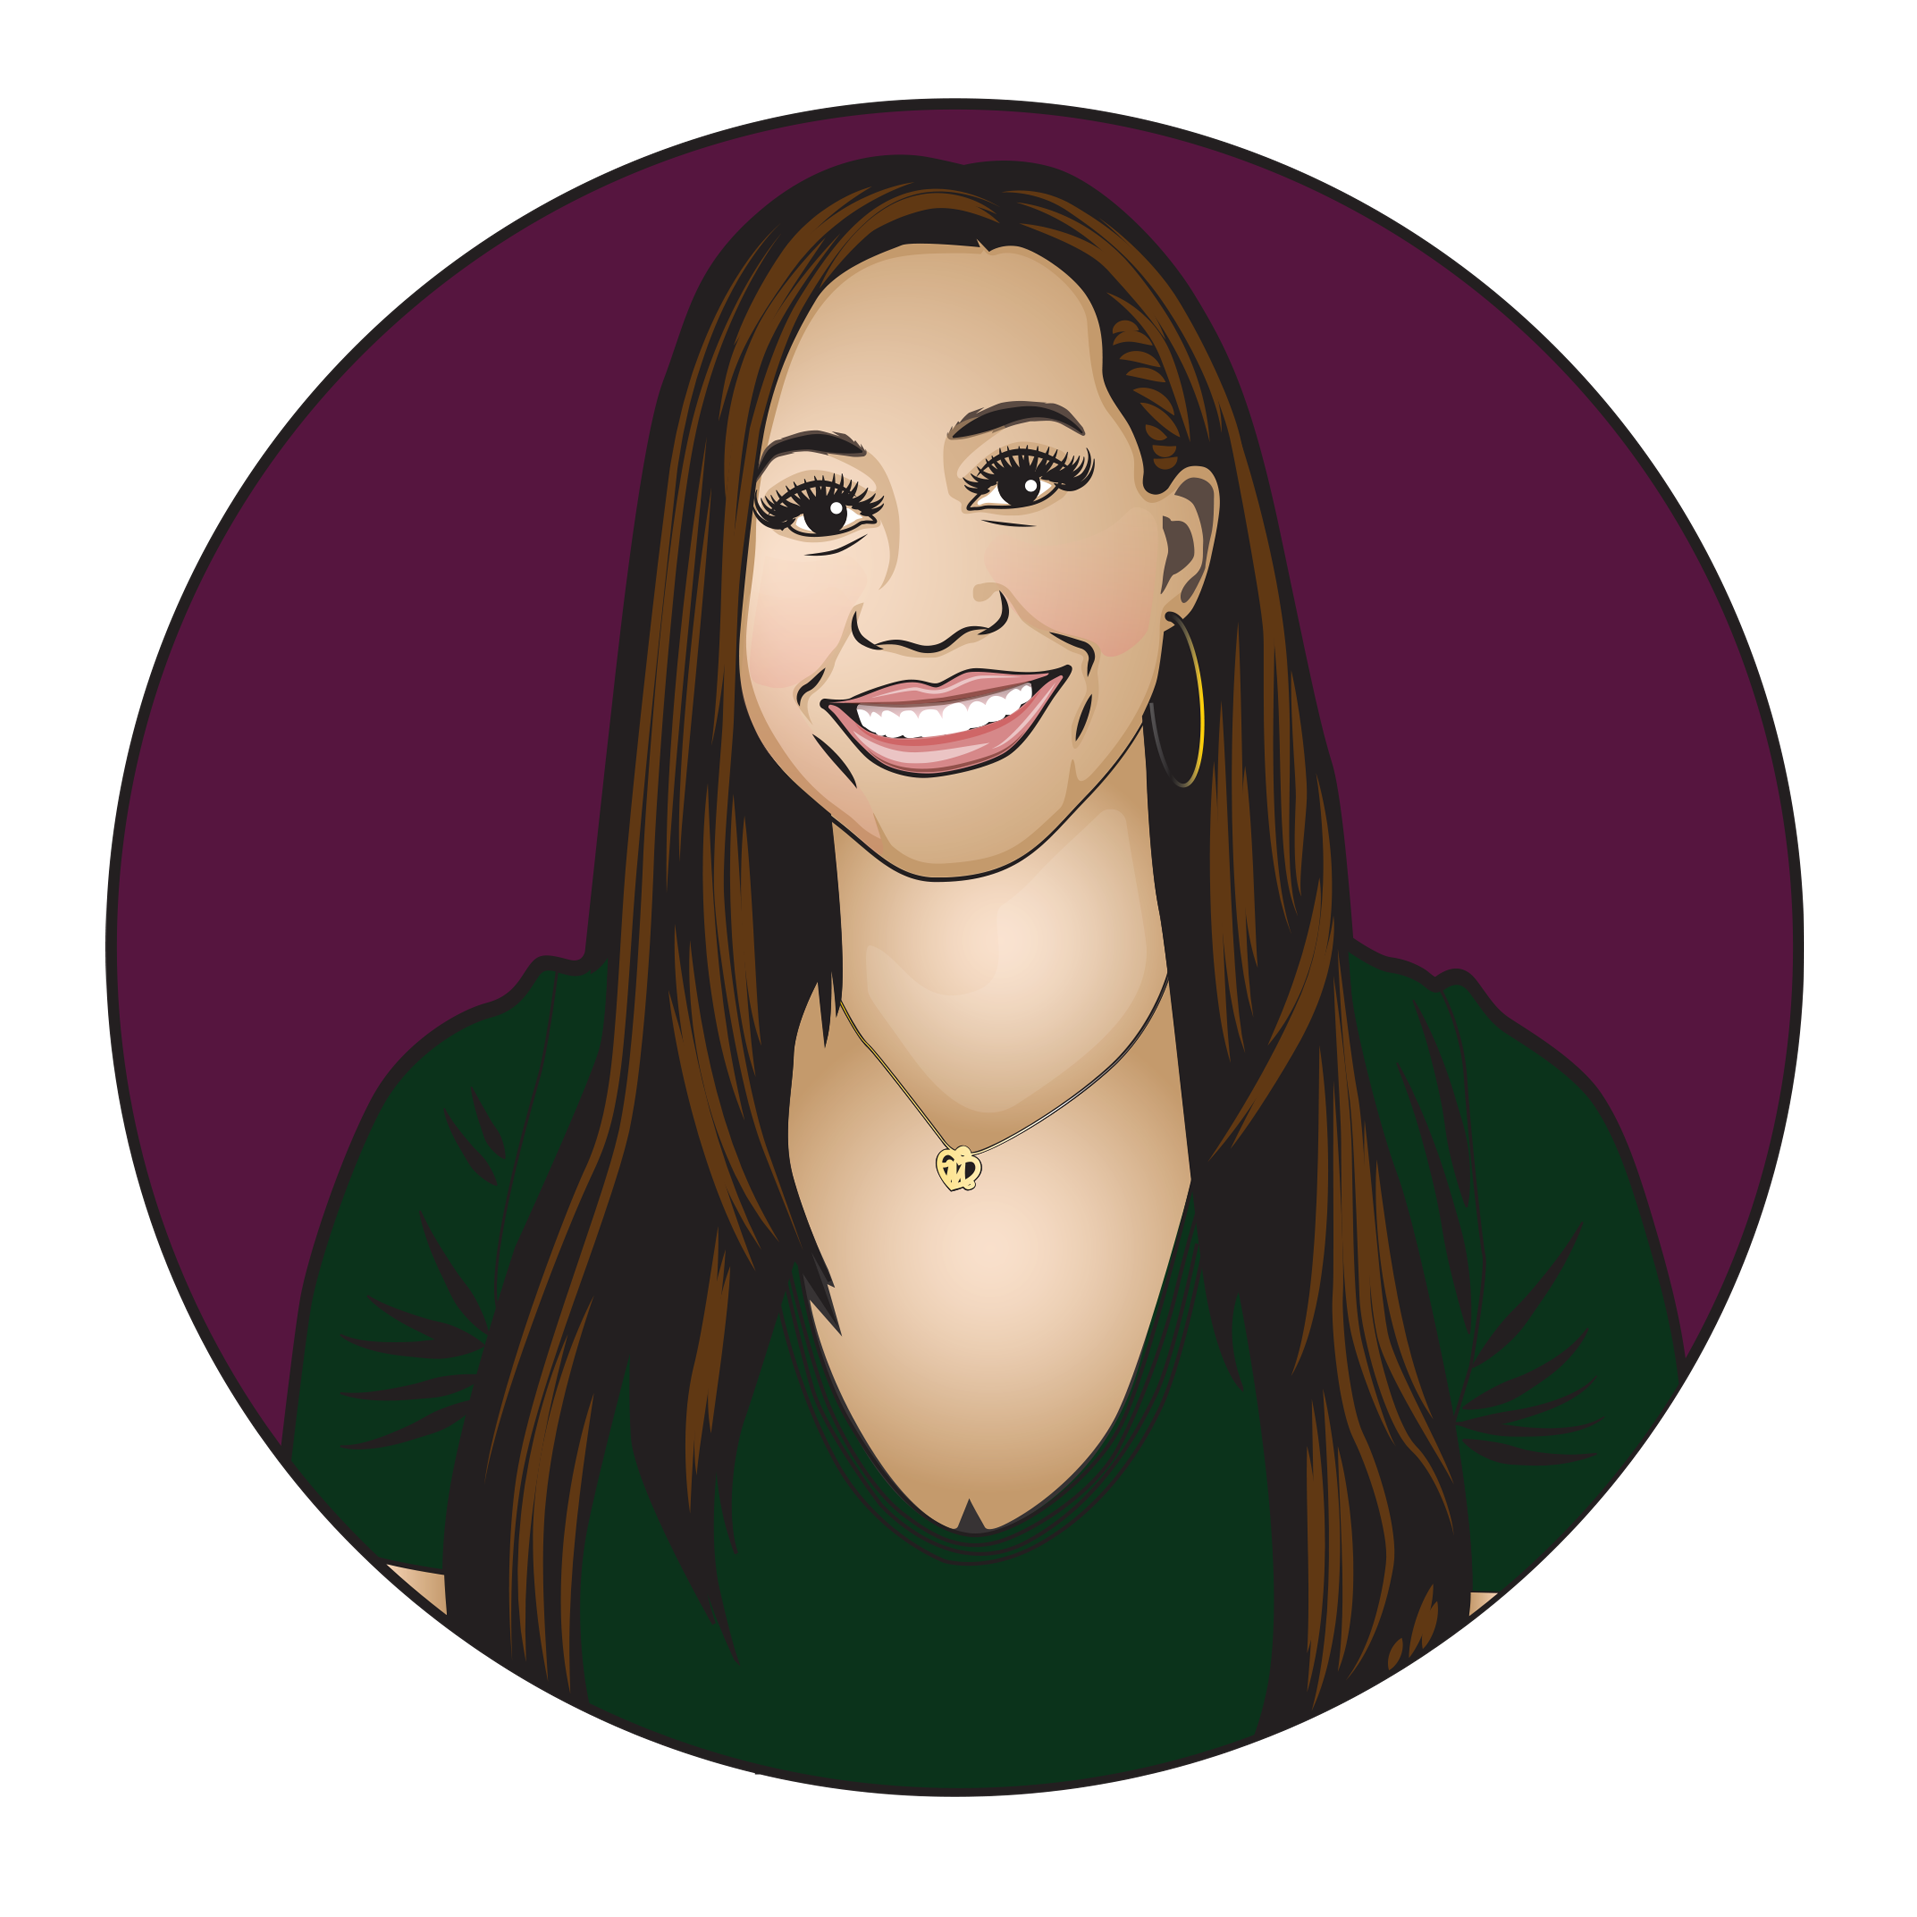 Illustrated image of Melissa, a light skinned Black woman with long brown hair. She is wearing a green top and pink lipstick. Her image is set against a burgundy background.